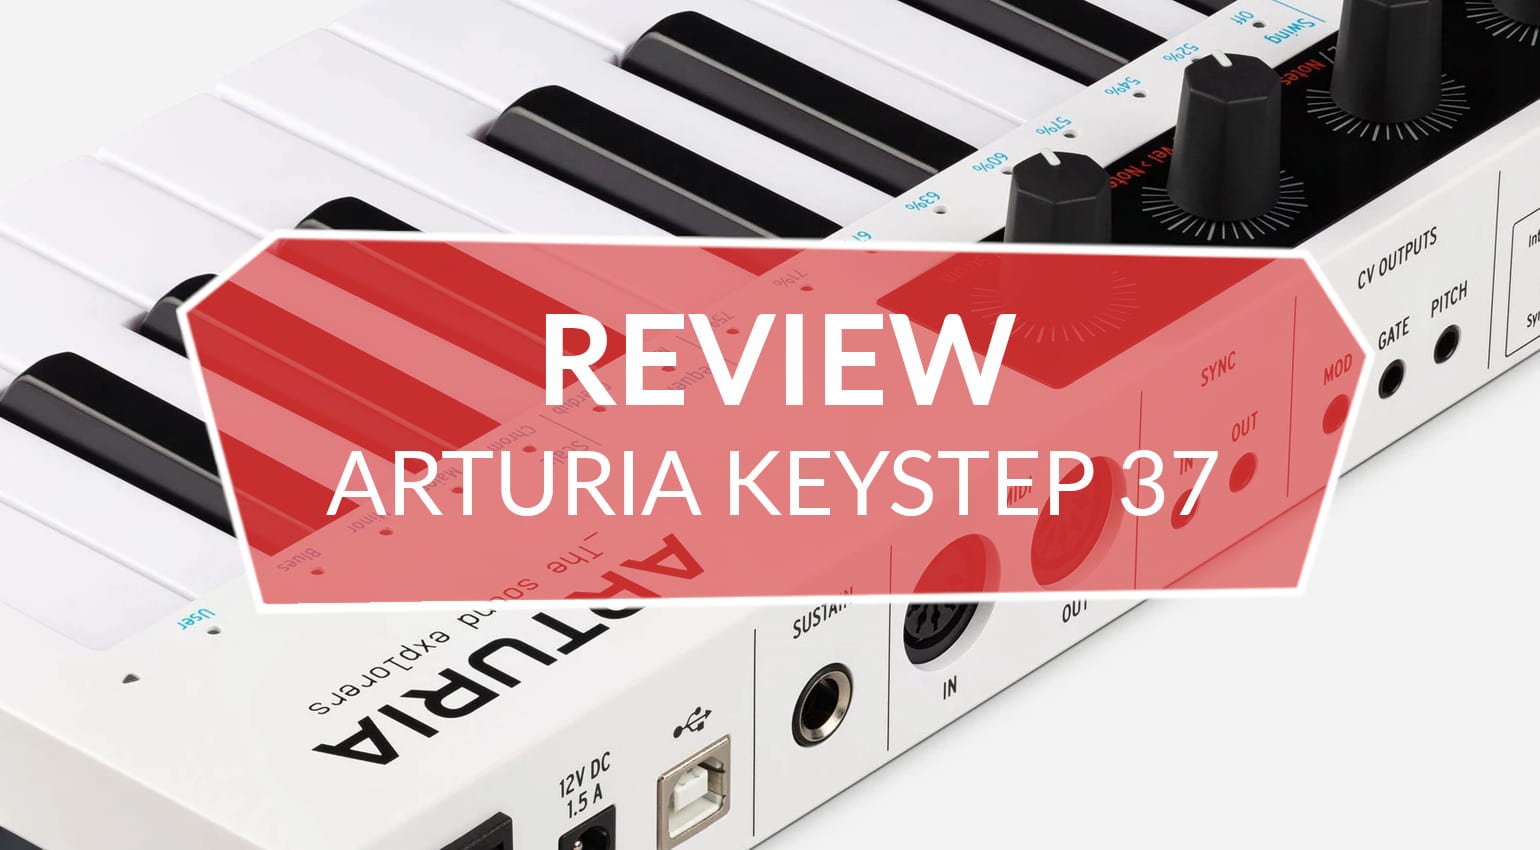 Review: Is the Arturia KeyStep 37 the perfect MIDI and Modular